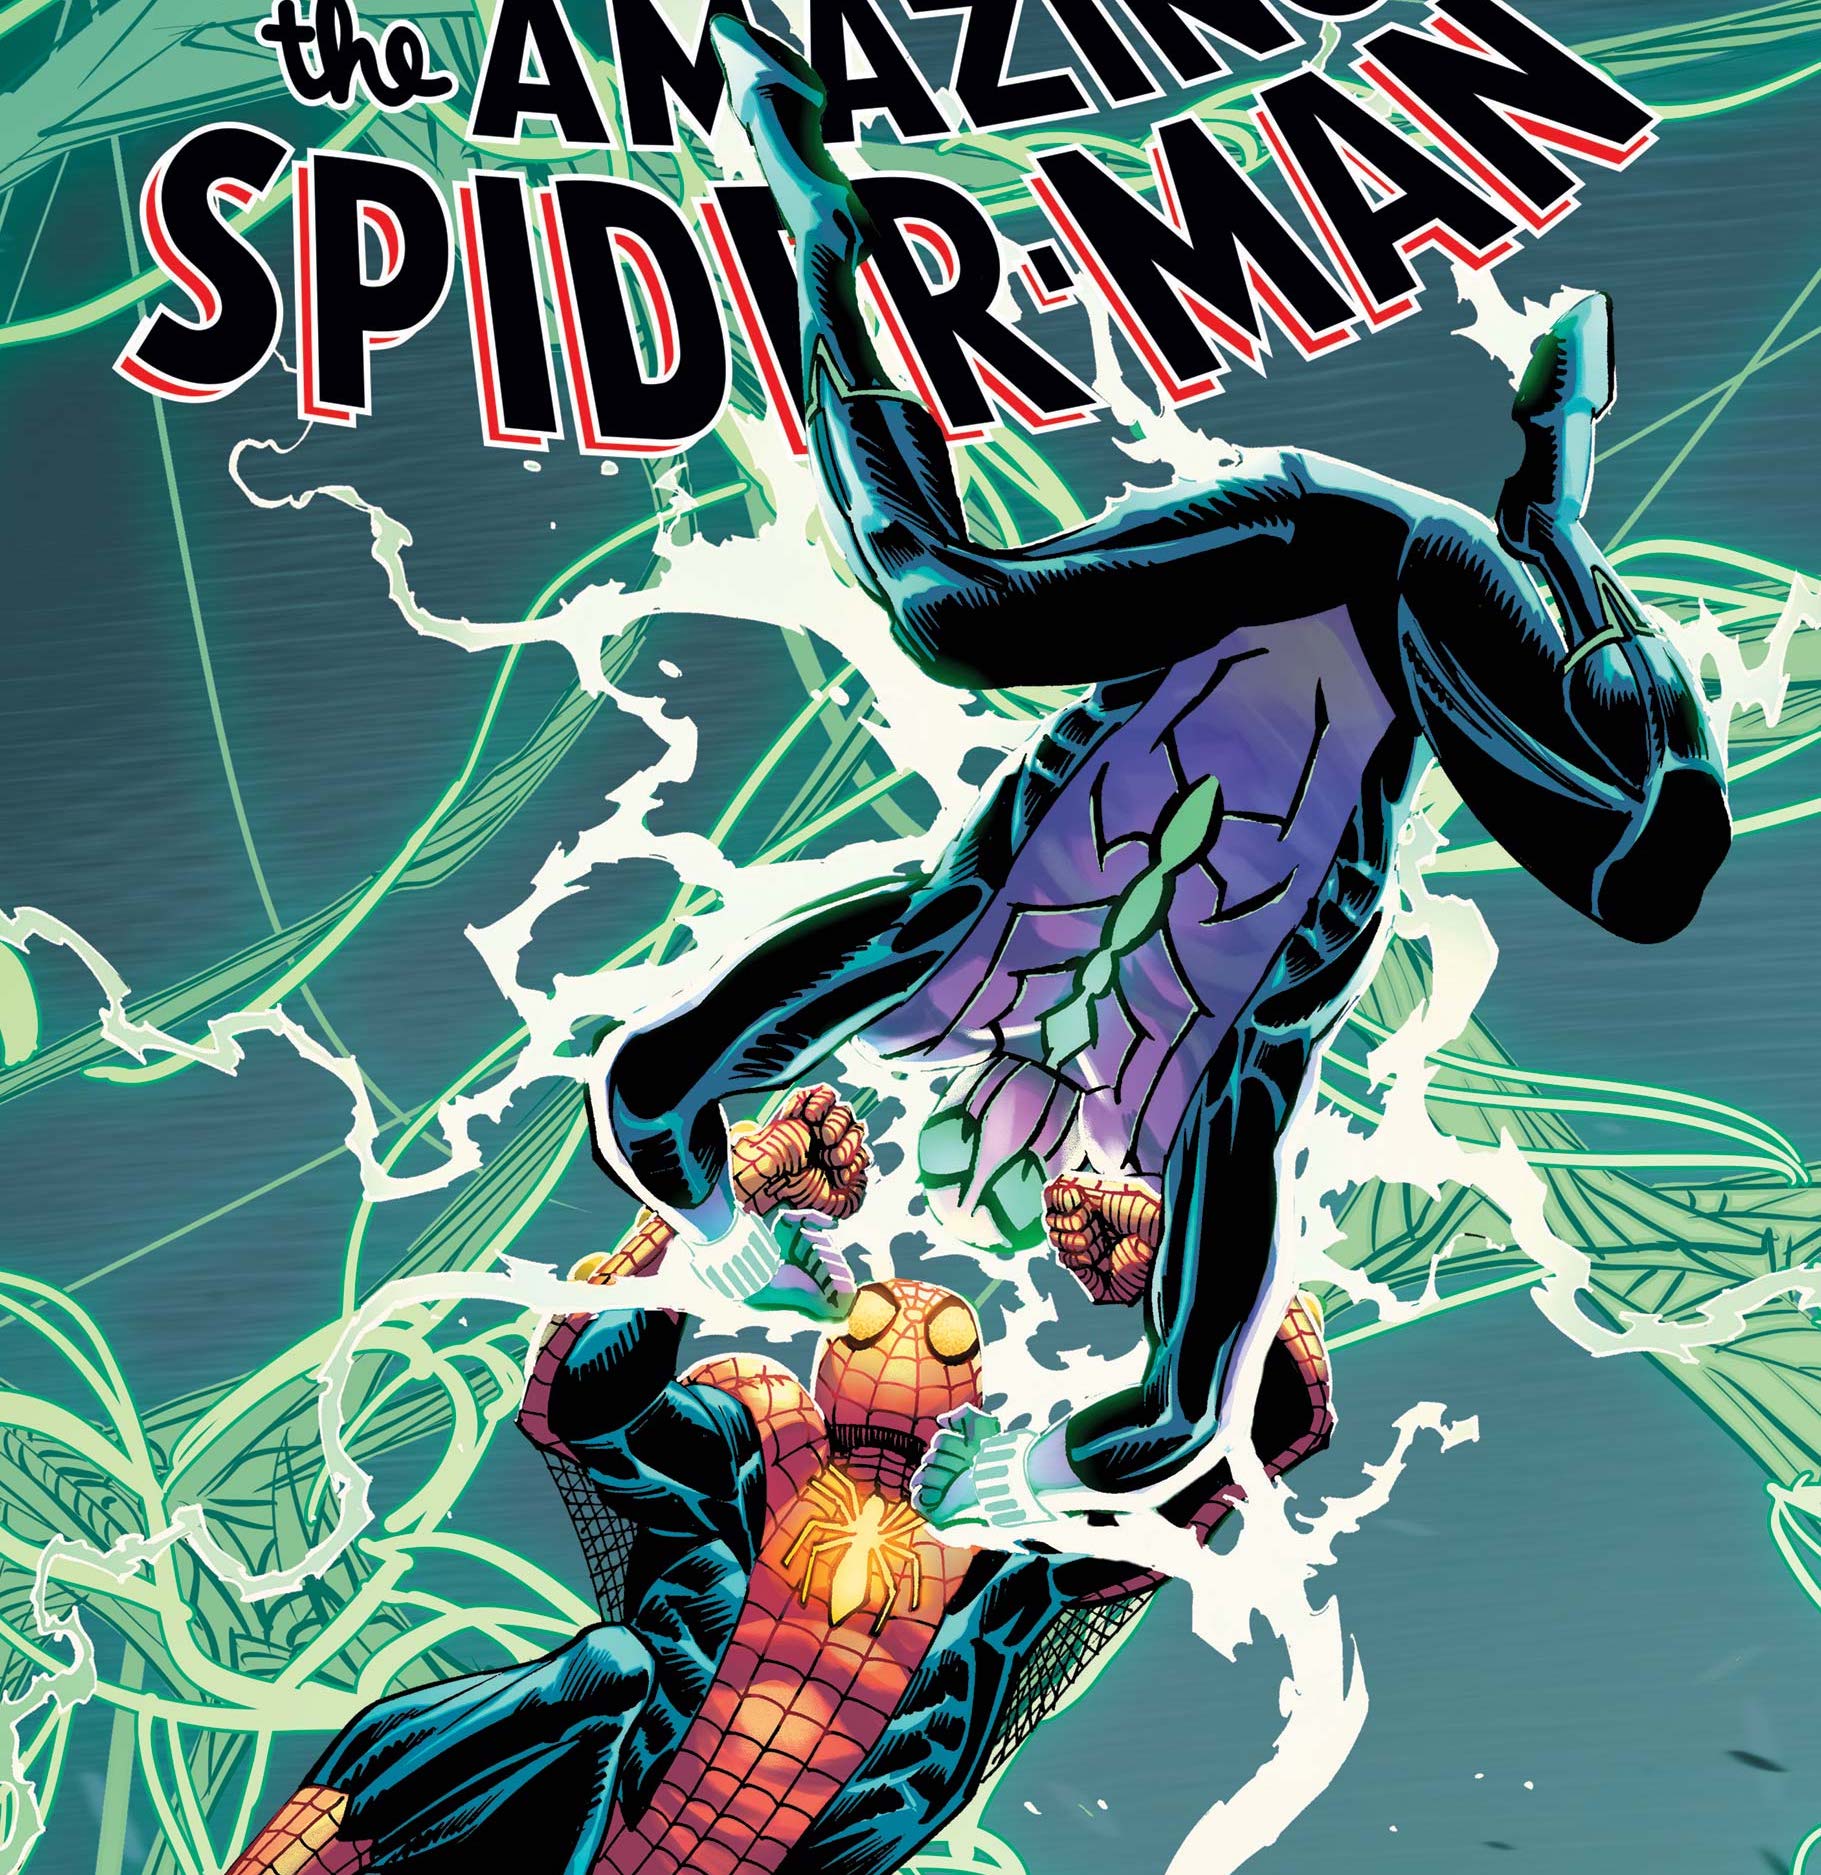 'Amazing Spider-Man' #16 shows off Chasm's new powers and abilities